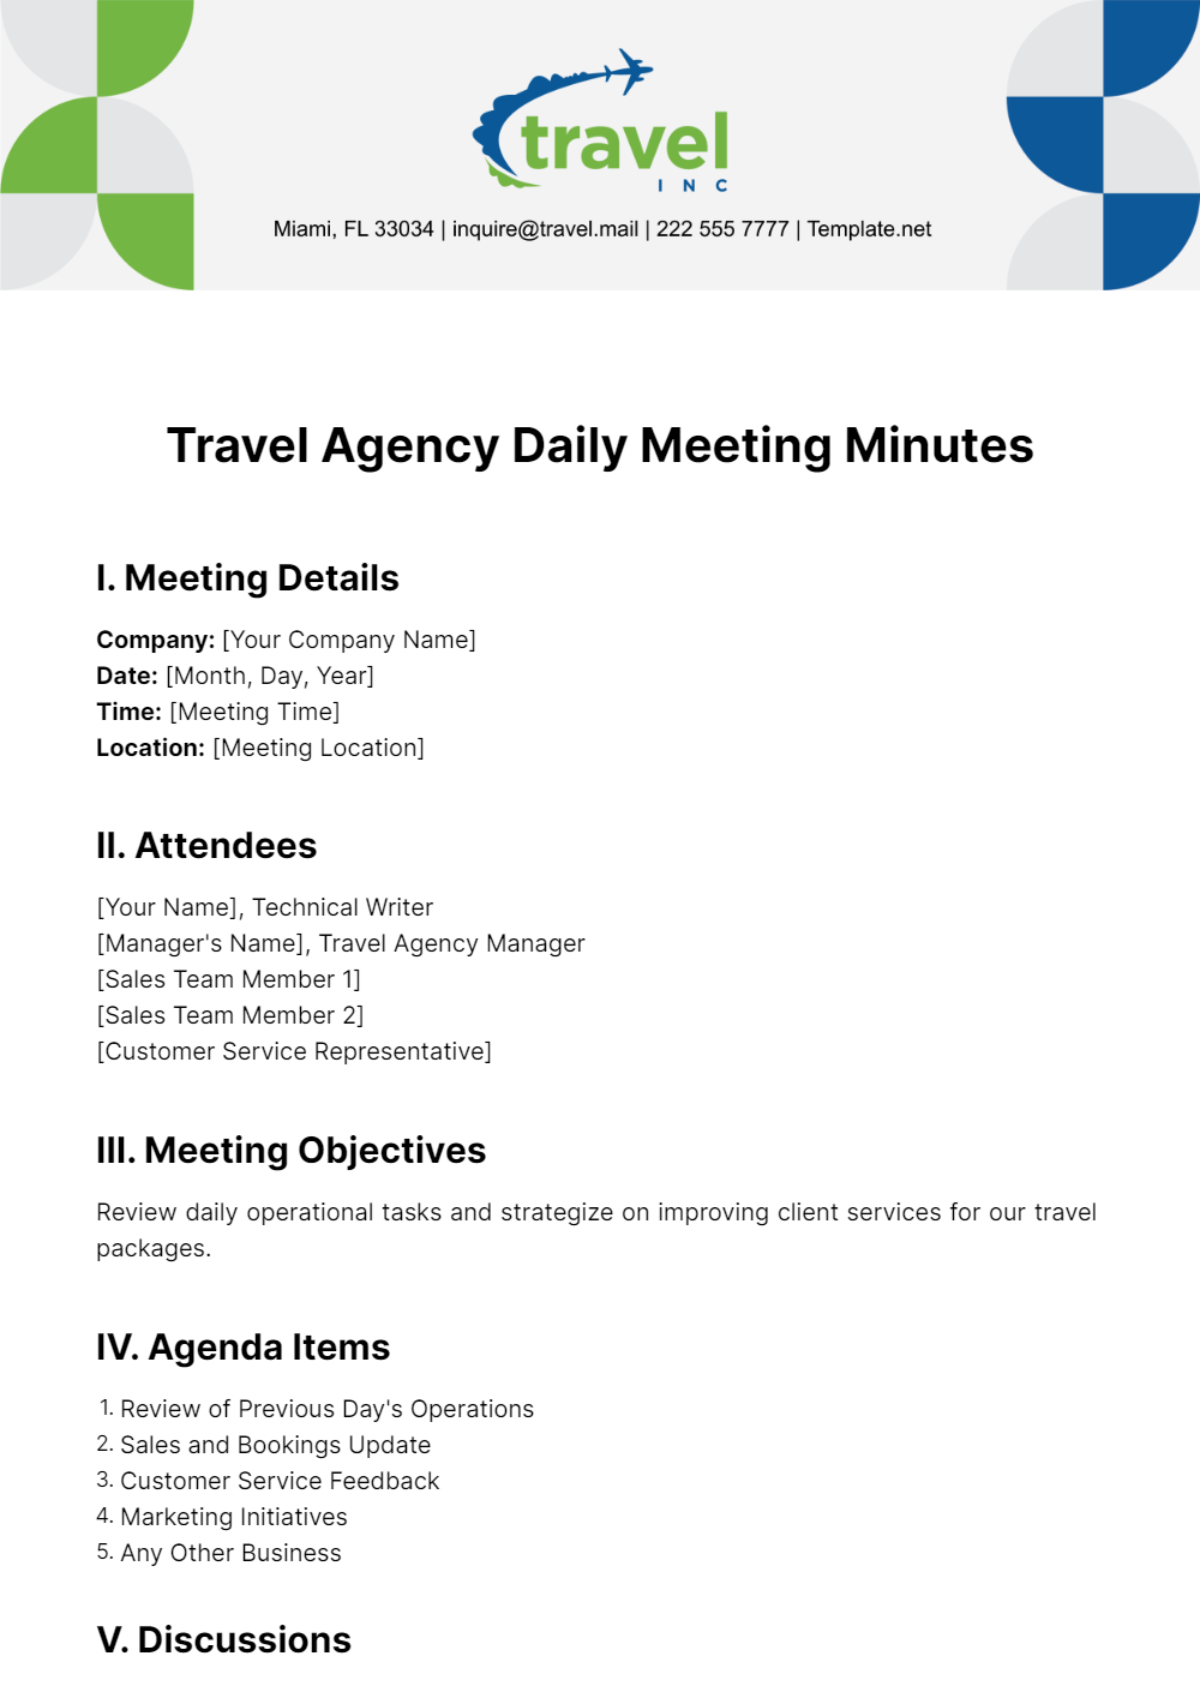 Free Travel Agency Daily Meeting Minutes Template